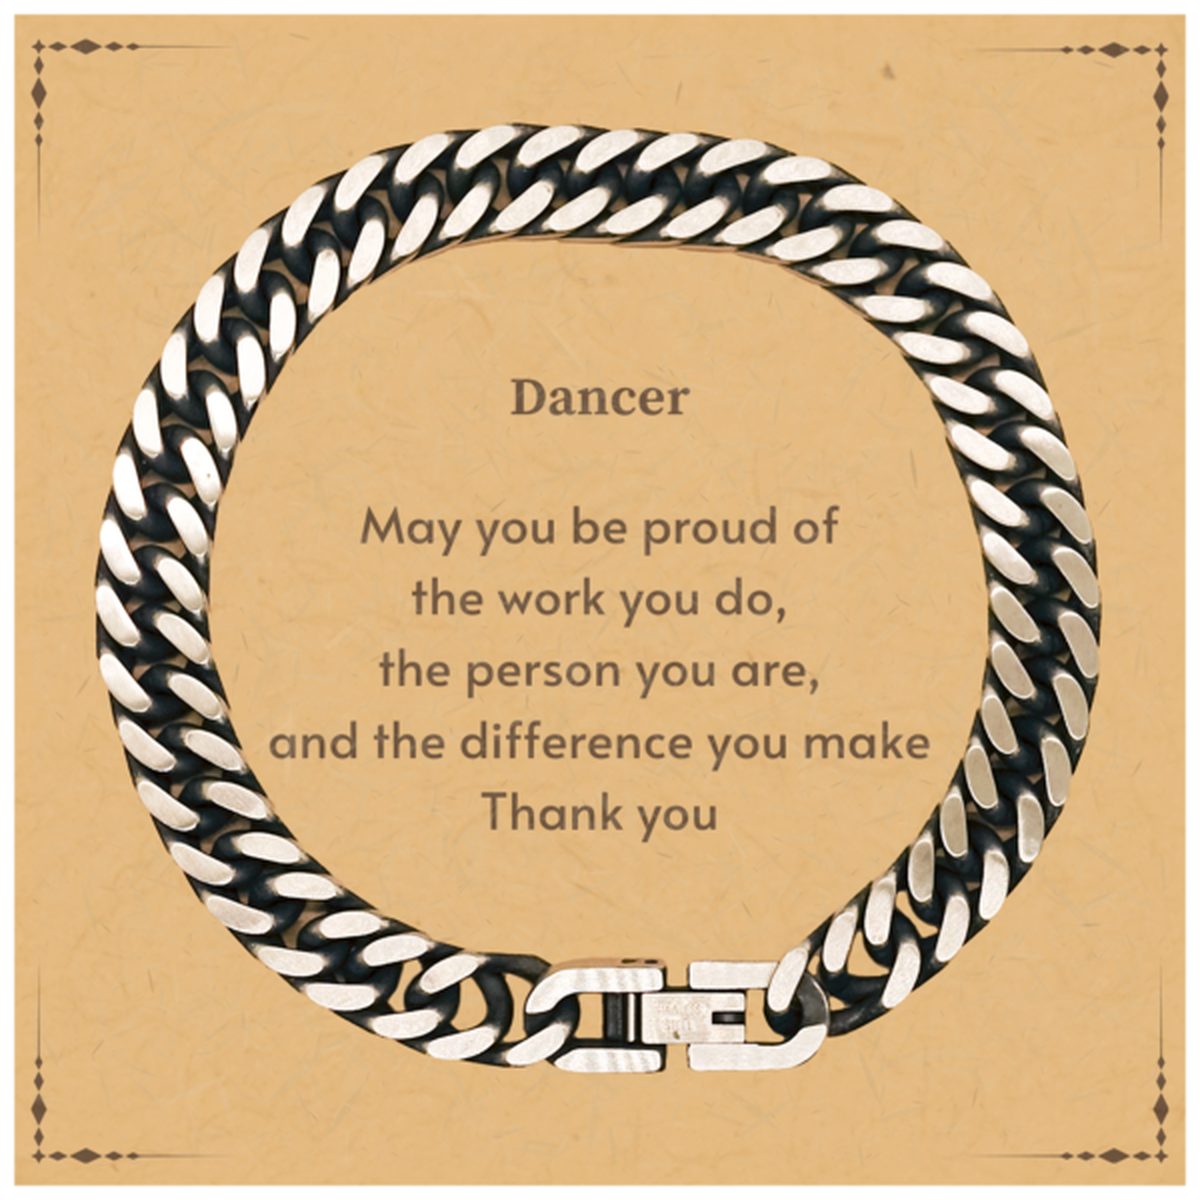 Heartwarming Cuban Link Chain Bracelet Retirement Coworkers Gifts for Dancer, Dancer May You be proud of the work you do, the person you are Gifts for Boss Men Women Friends